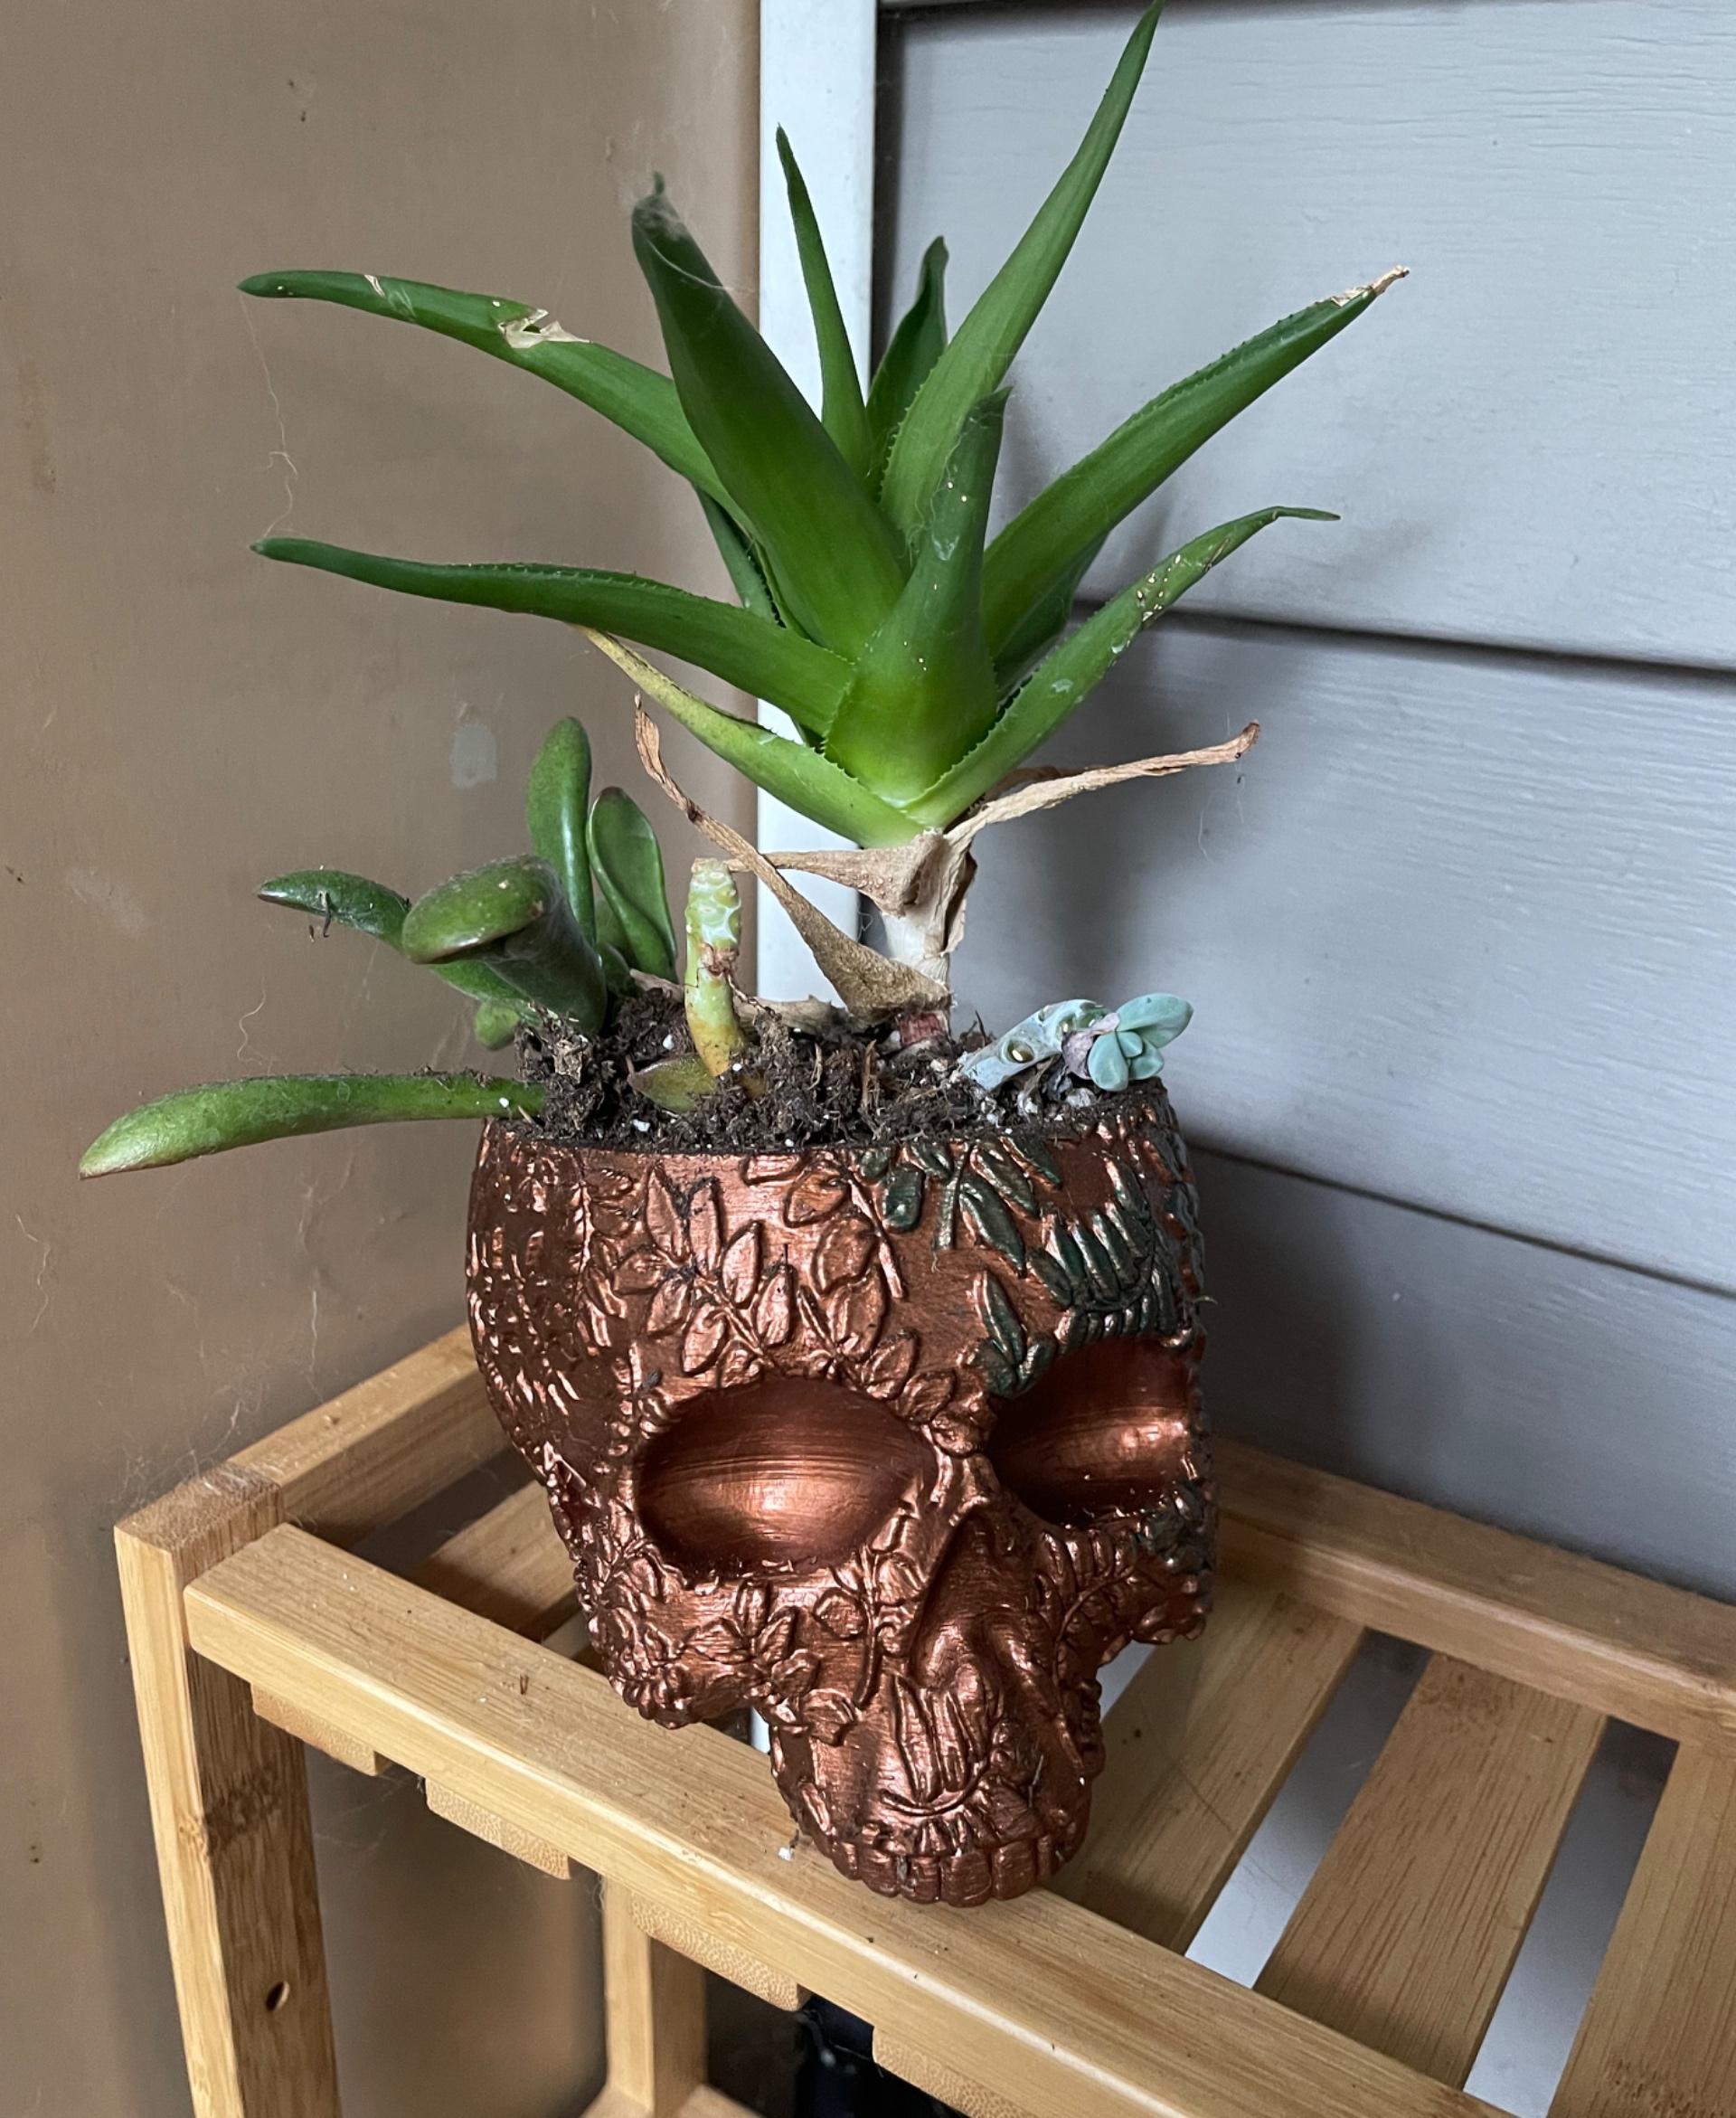 Fern Skull Planter-Bowl - Coated in a copper-based paint so that it oxidizes as it’s exposed to weather 💀 - 3d model